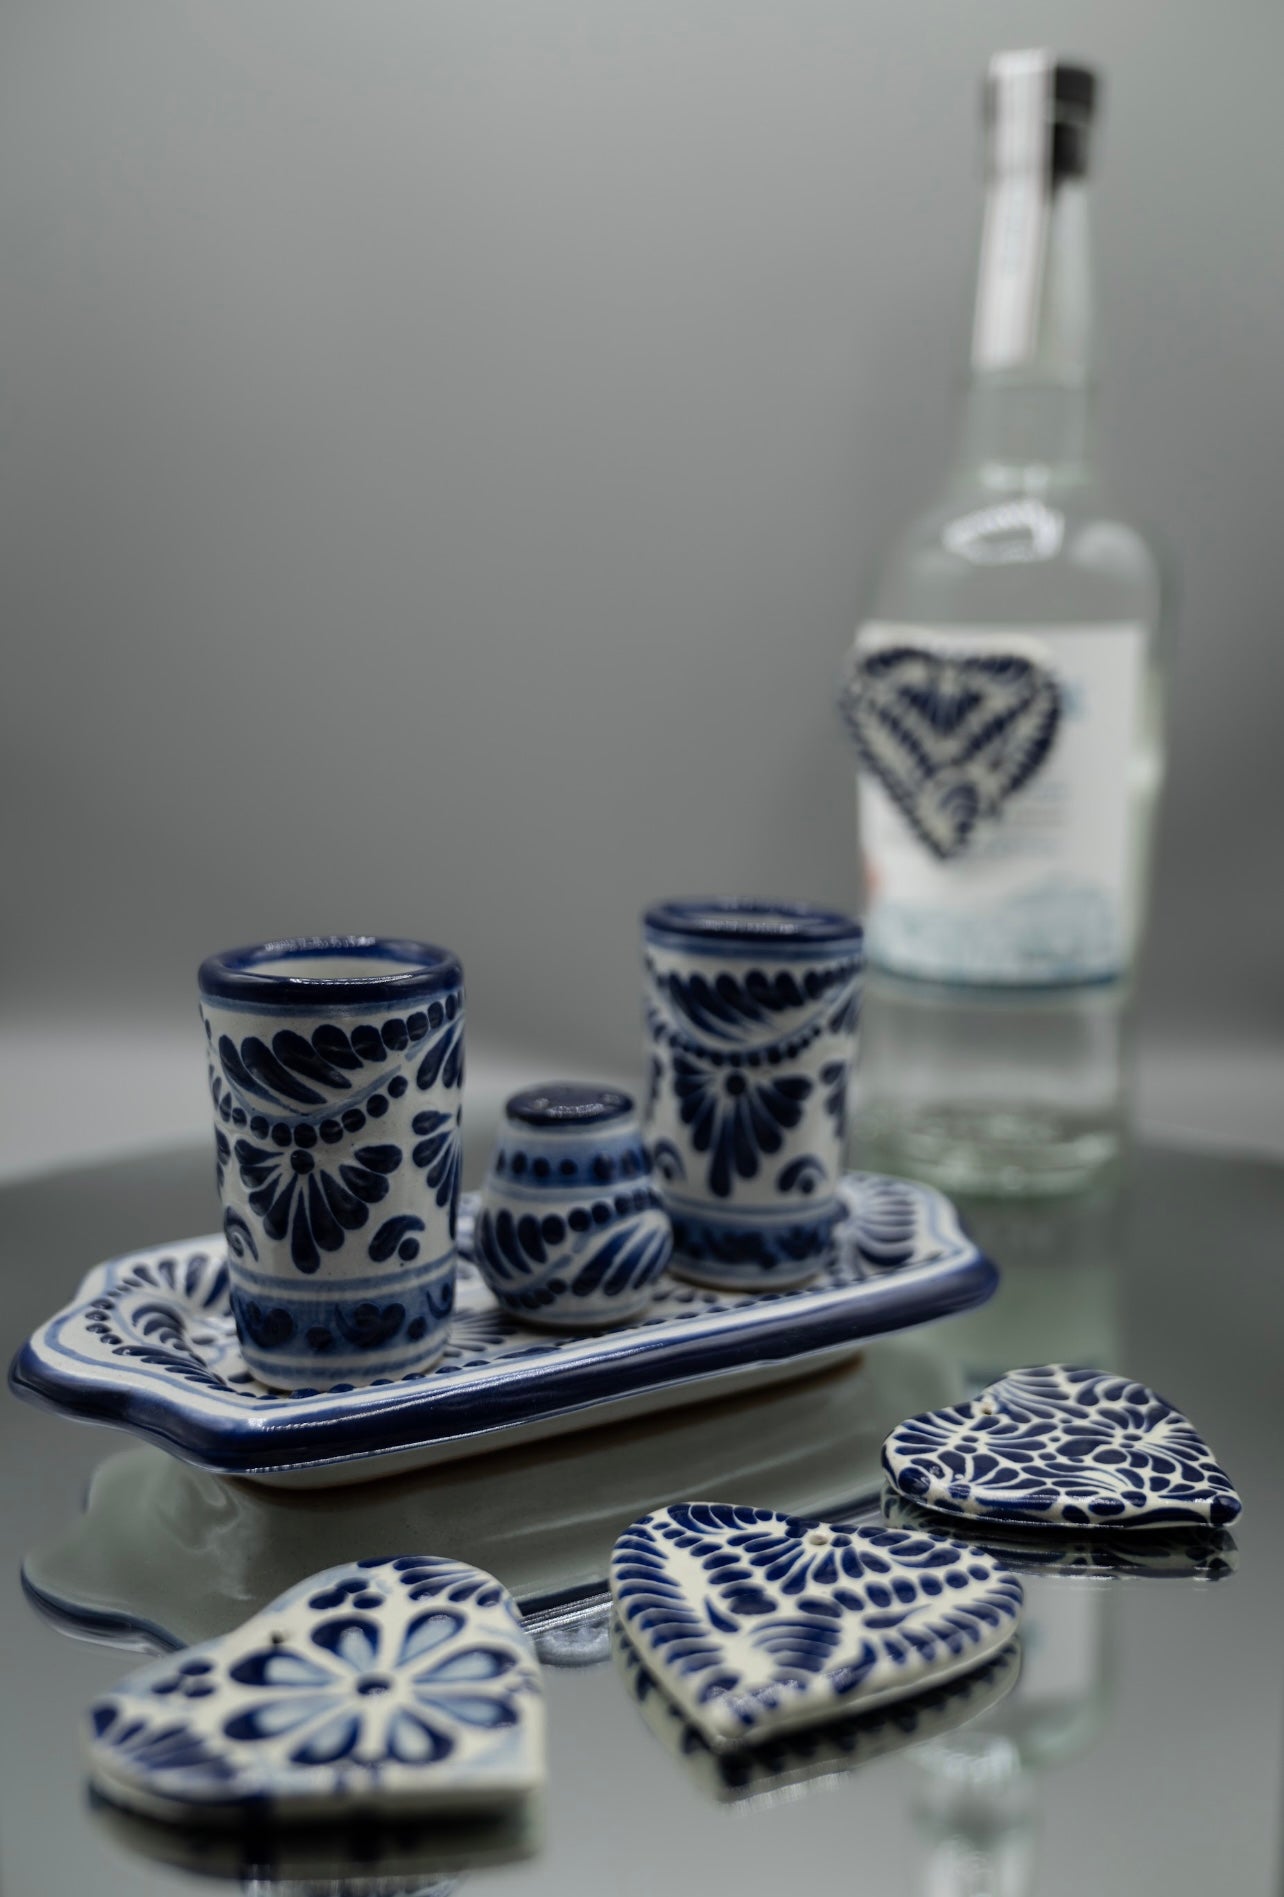 Party Lover & Mex Traditional - Tequilero Set